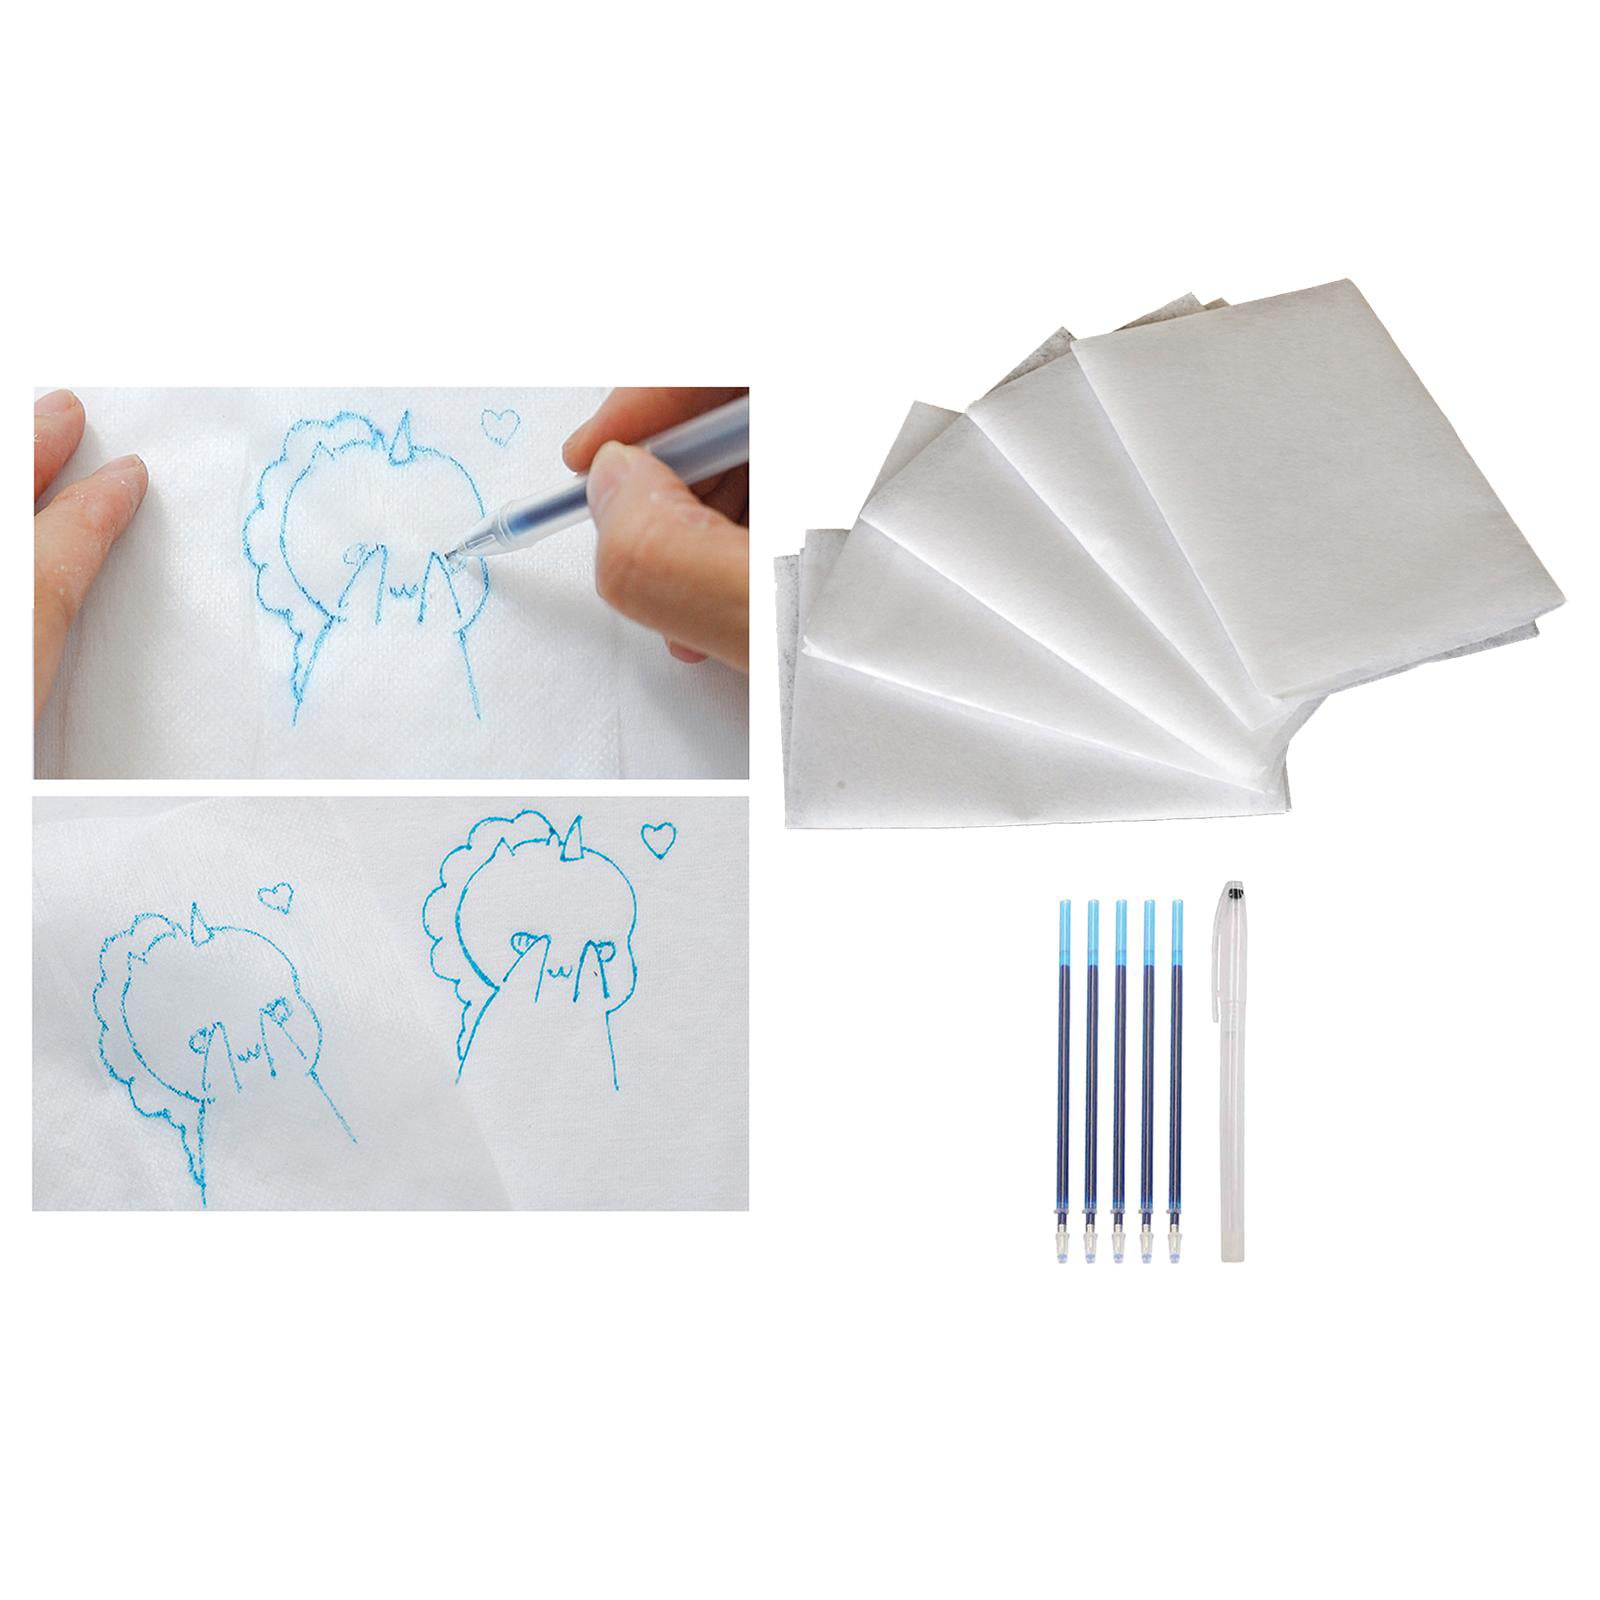 10 Pcs Transfer Paper Repeatedly Use Carbon Water-Soluble Tracing Paper  8×6,Transfer Pattern on Cloth,Fabric,Canvas,Paper for Home Sewing